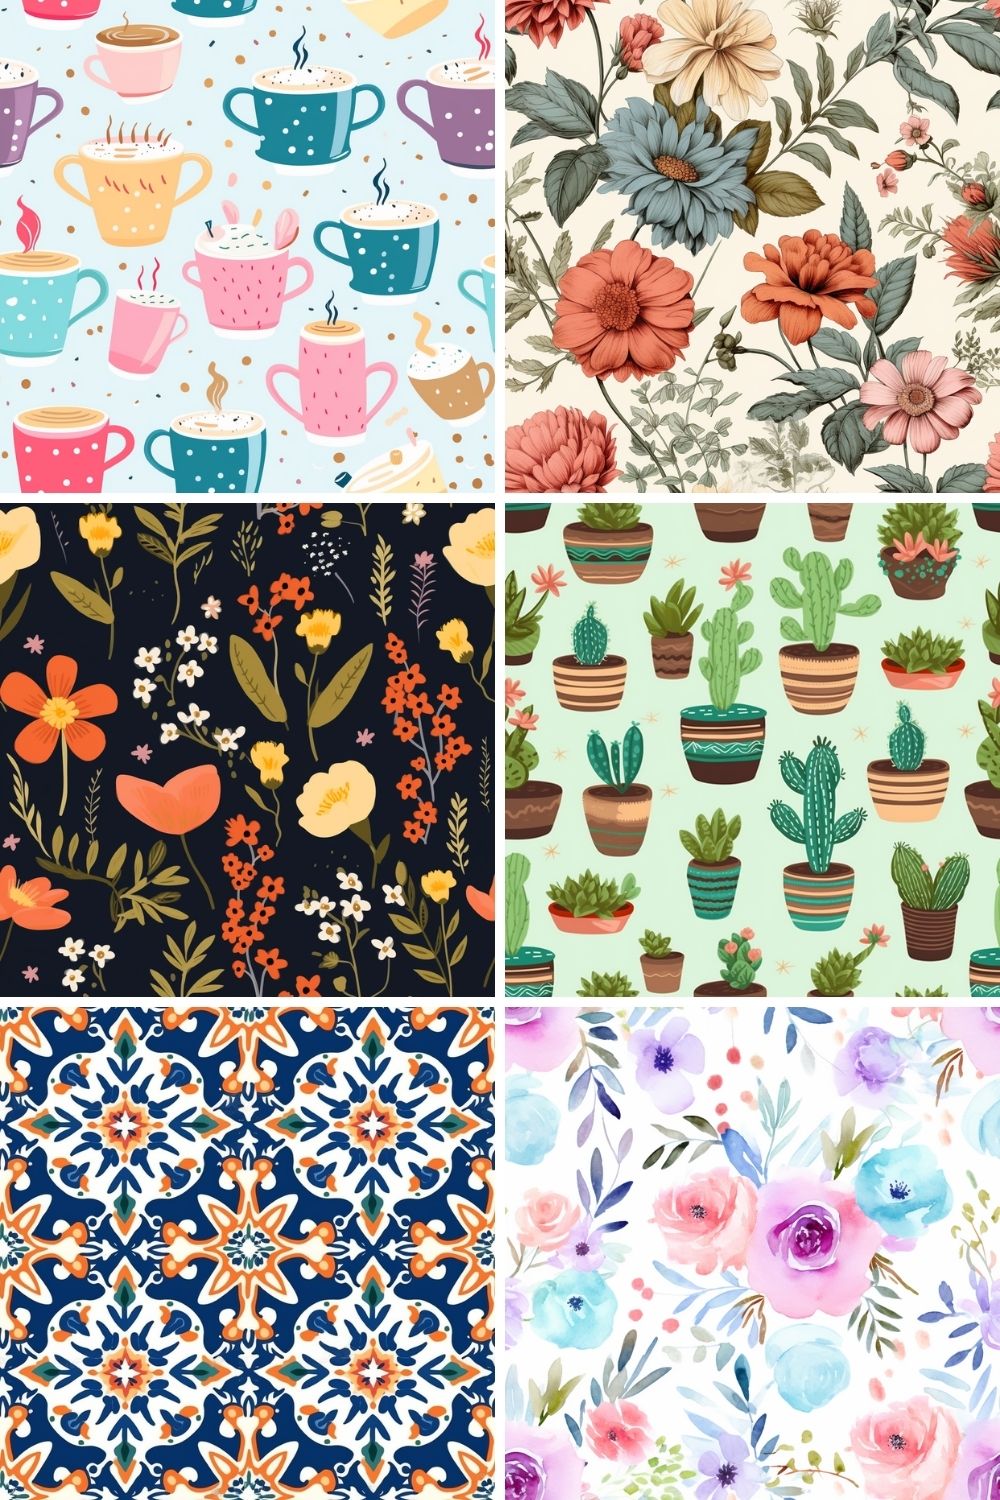 SEAMLESS PATTERNS - Best Creative Unique Midjourney Prompt Ideas To Spark Your Creativity - Sprinkle of AI Image Prompt Set 20